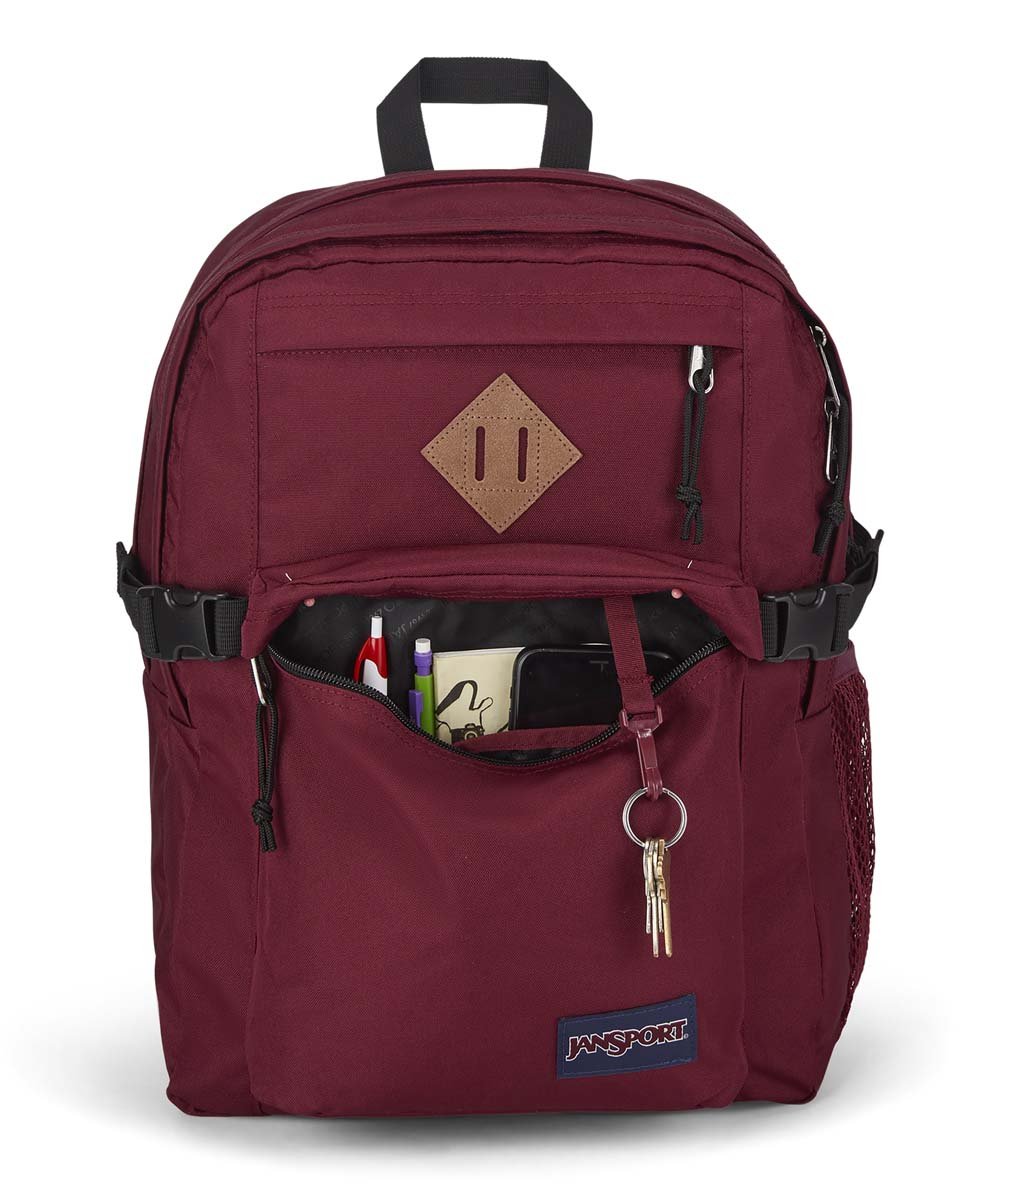 JanSport Main Campus Backpack - Russett Red